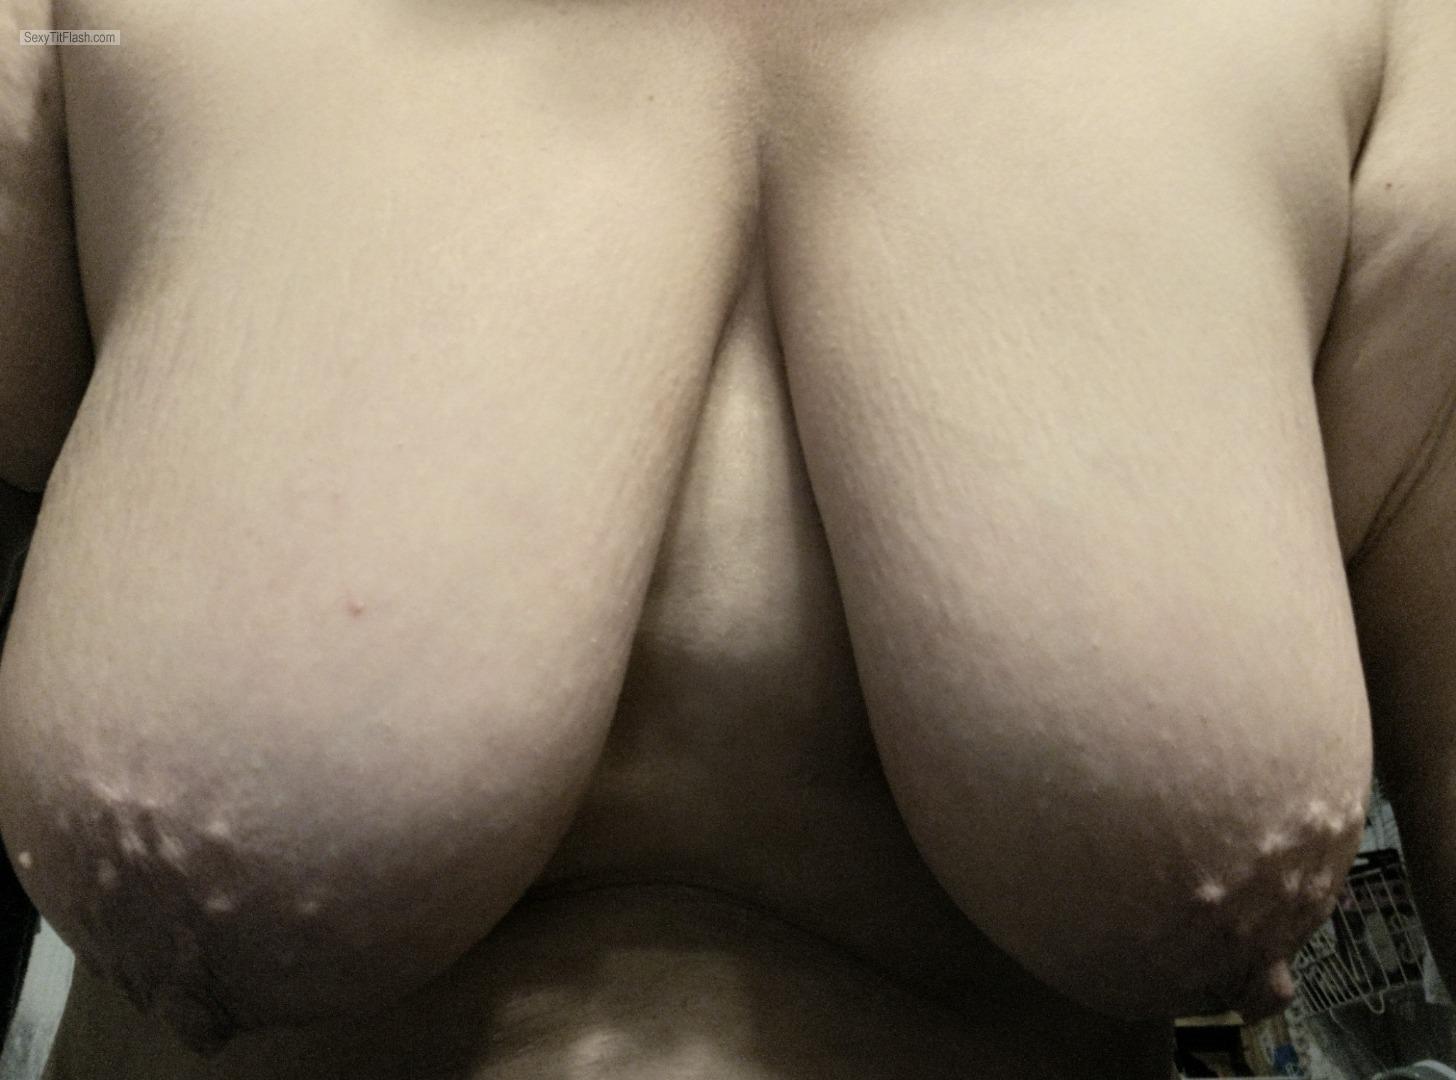 Tit Flash: Wife's Big Tits (Selfie) - Peaches from United States